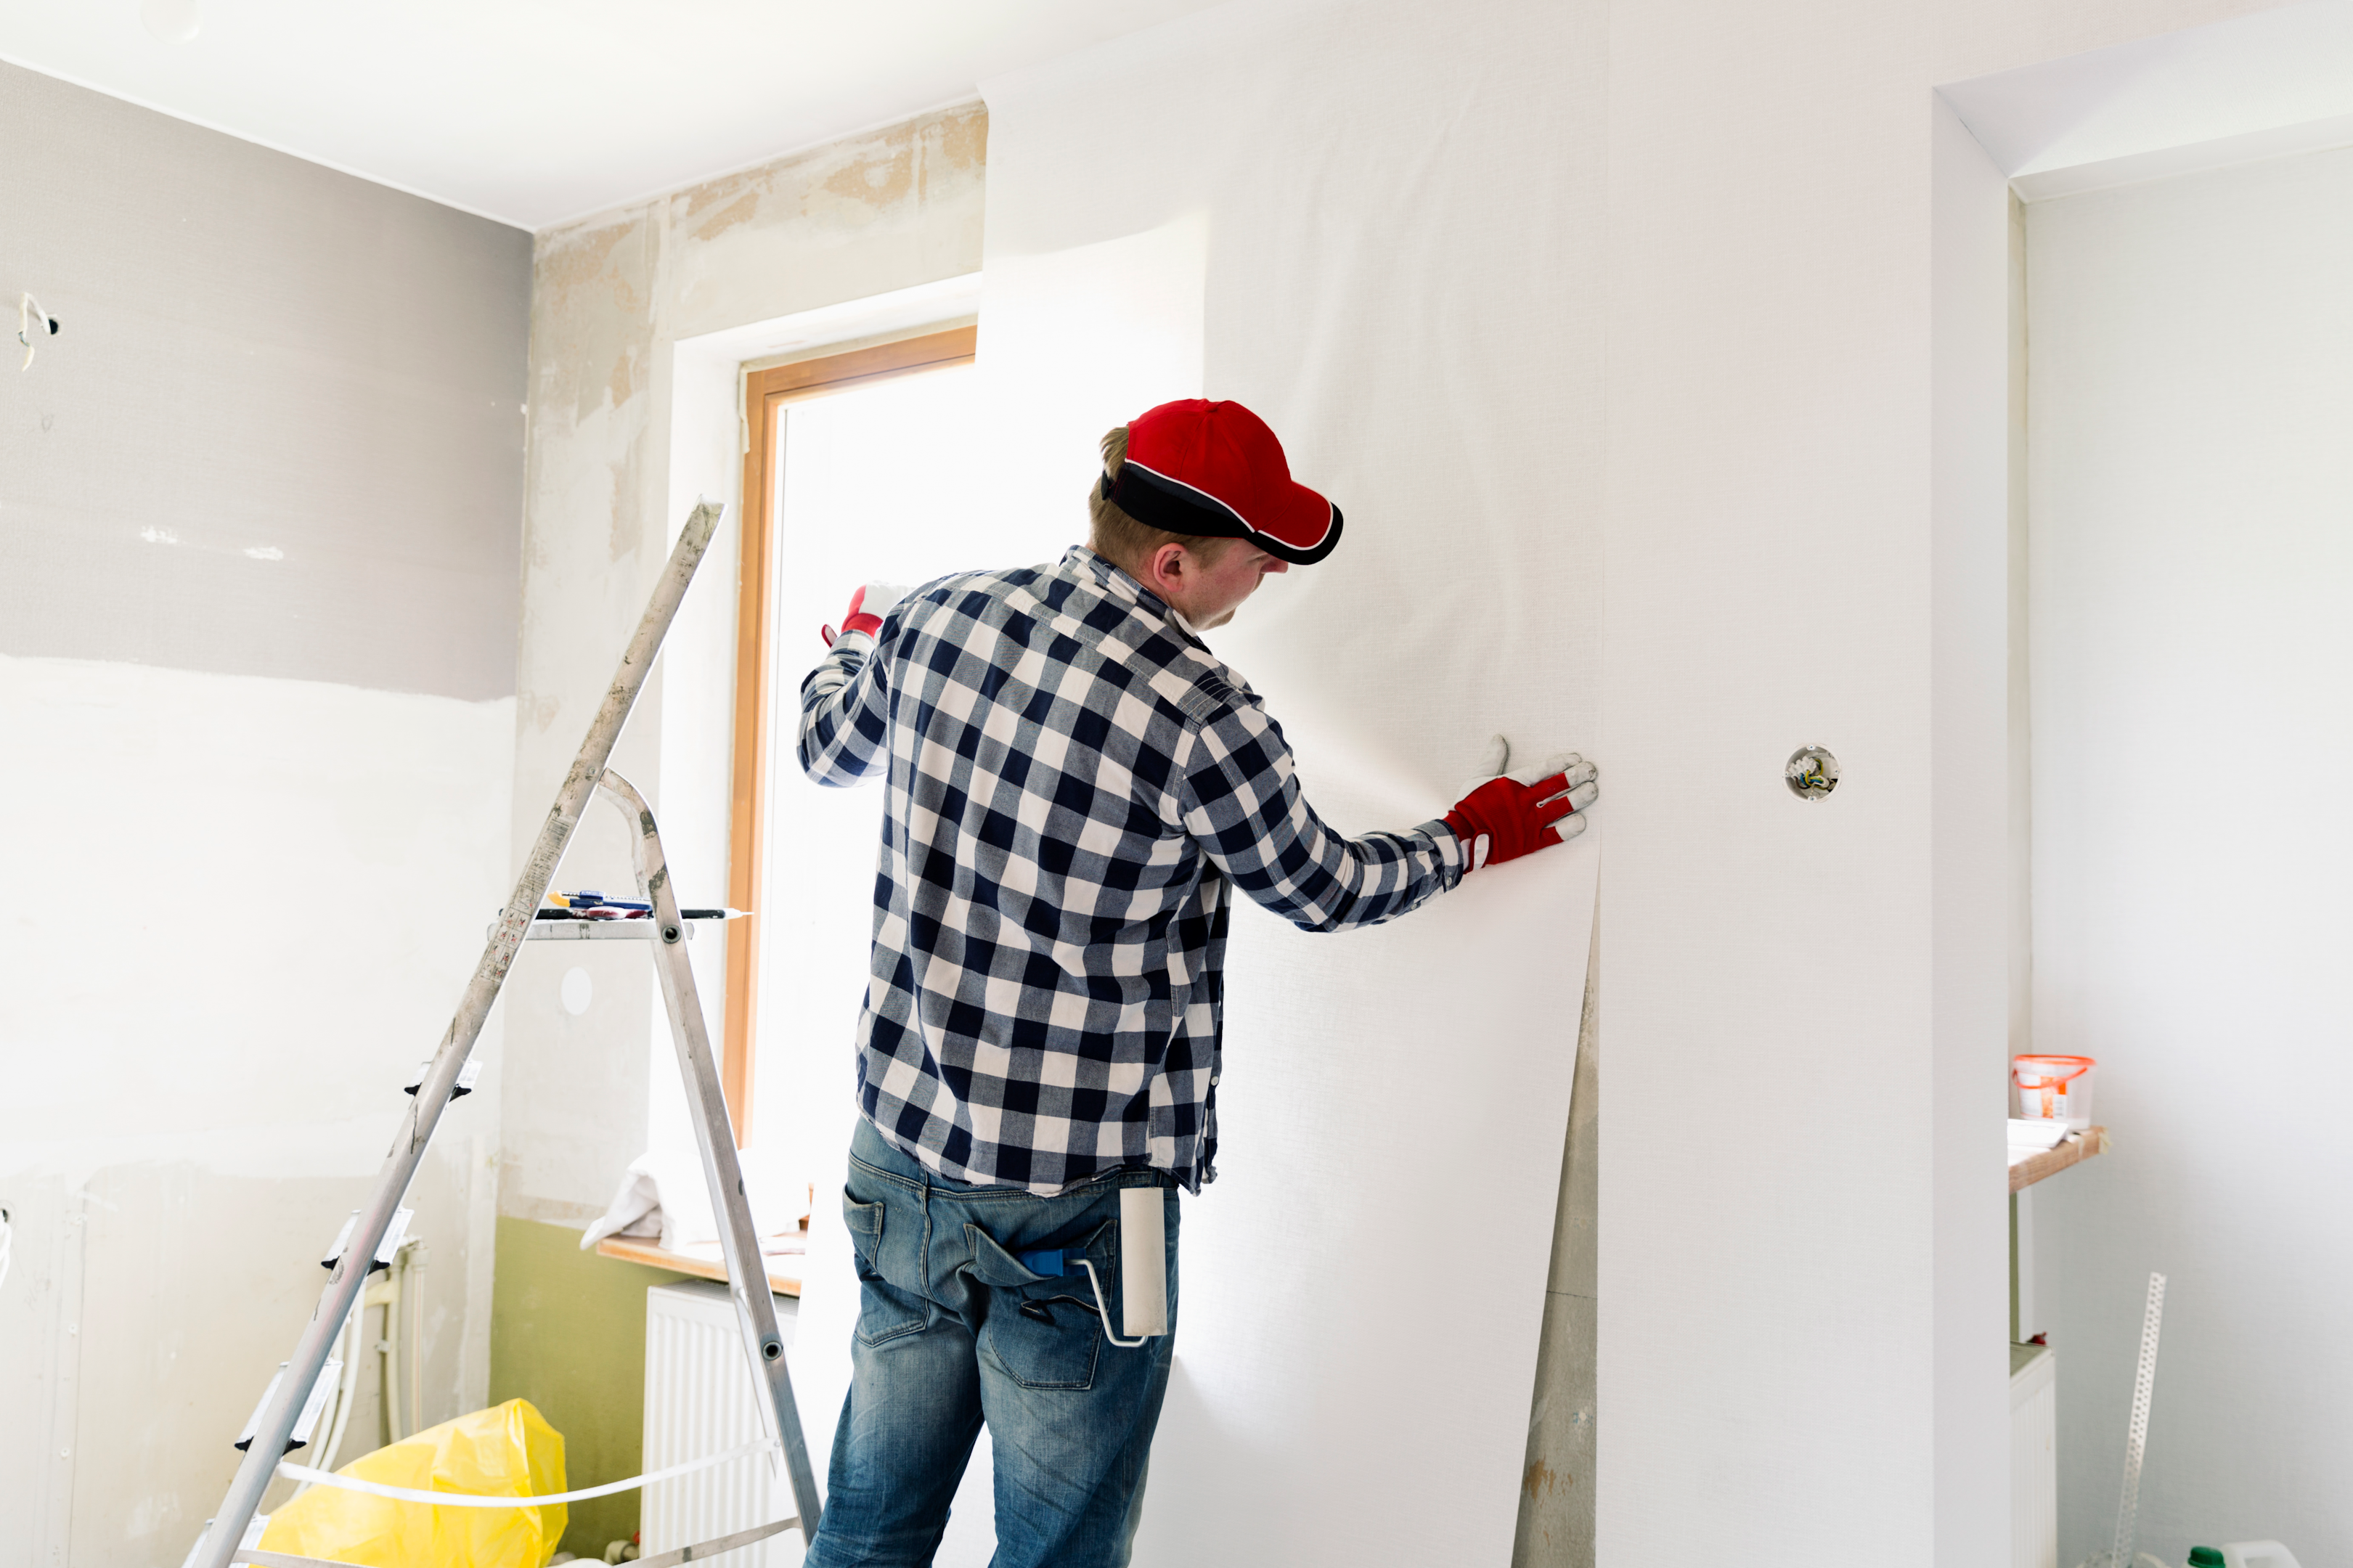 Source: artursfoto, iStock, https://www.istockphoto.com/de/foto/paste-wallpaper-at-home-young-man-is-worker-putting-up-wallpaper-on-the-wall-gm954924076- 260729076?phrase=to wallpaper